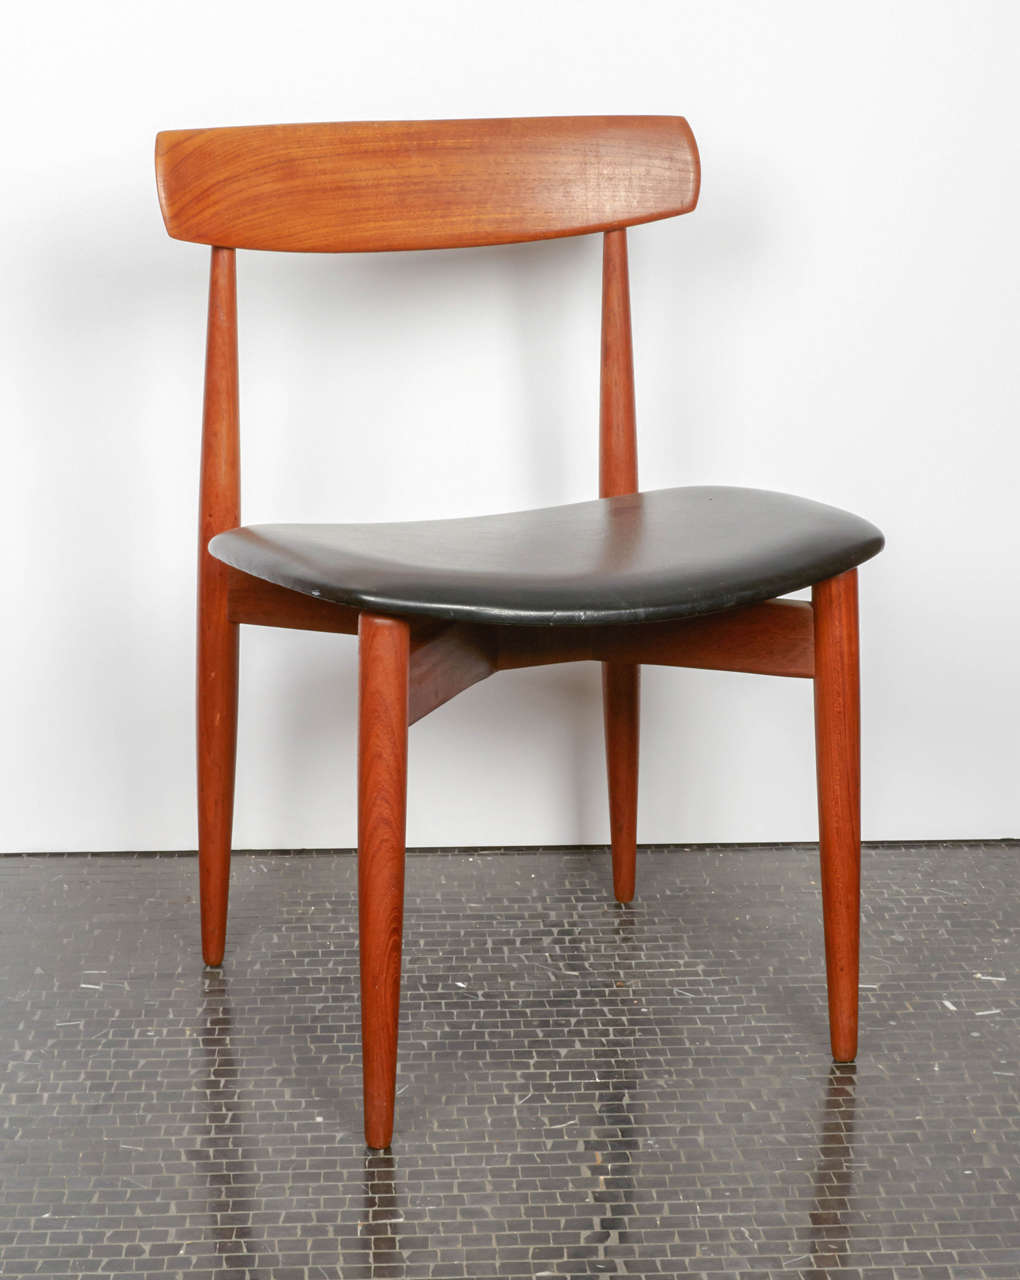 This set of four dining chairs, model 250, was designed by H. W. Klein in 1964 and produced by Bramin Furniture. Each chair is made from solid teak and upholstered in black leather.